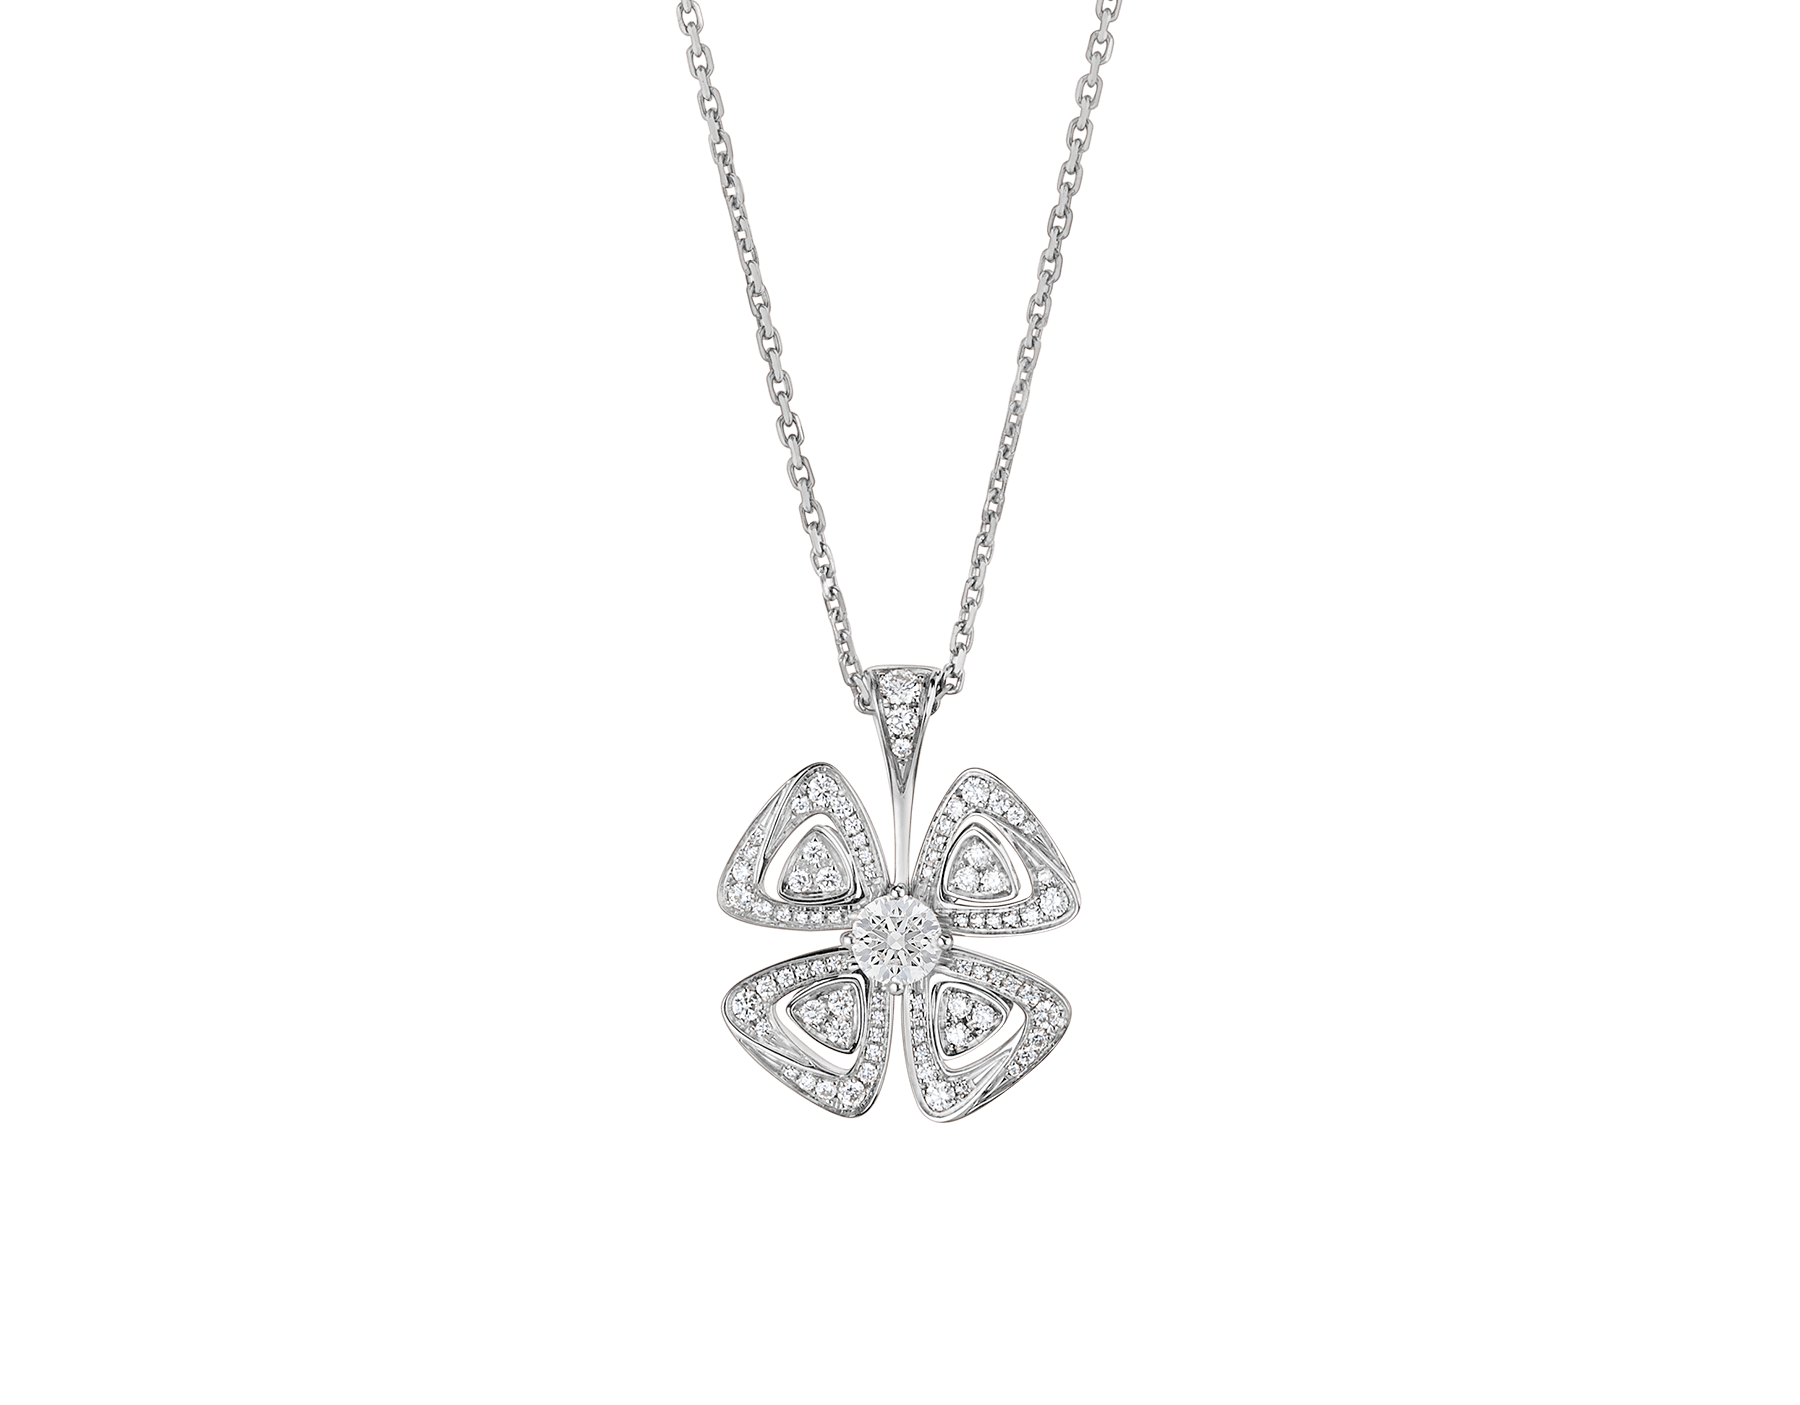 Fiorever 18 kt white gold necklace set with a central diamond (0.30 ct) and pavé diamonds (0.36 ct) 354496 image 1